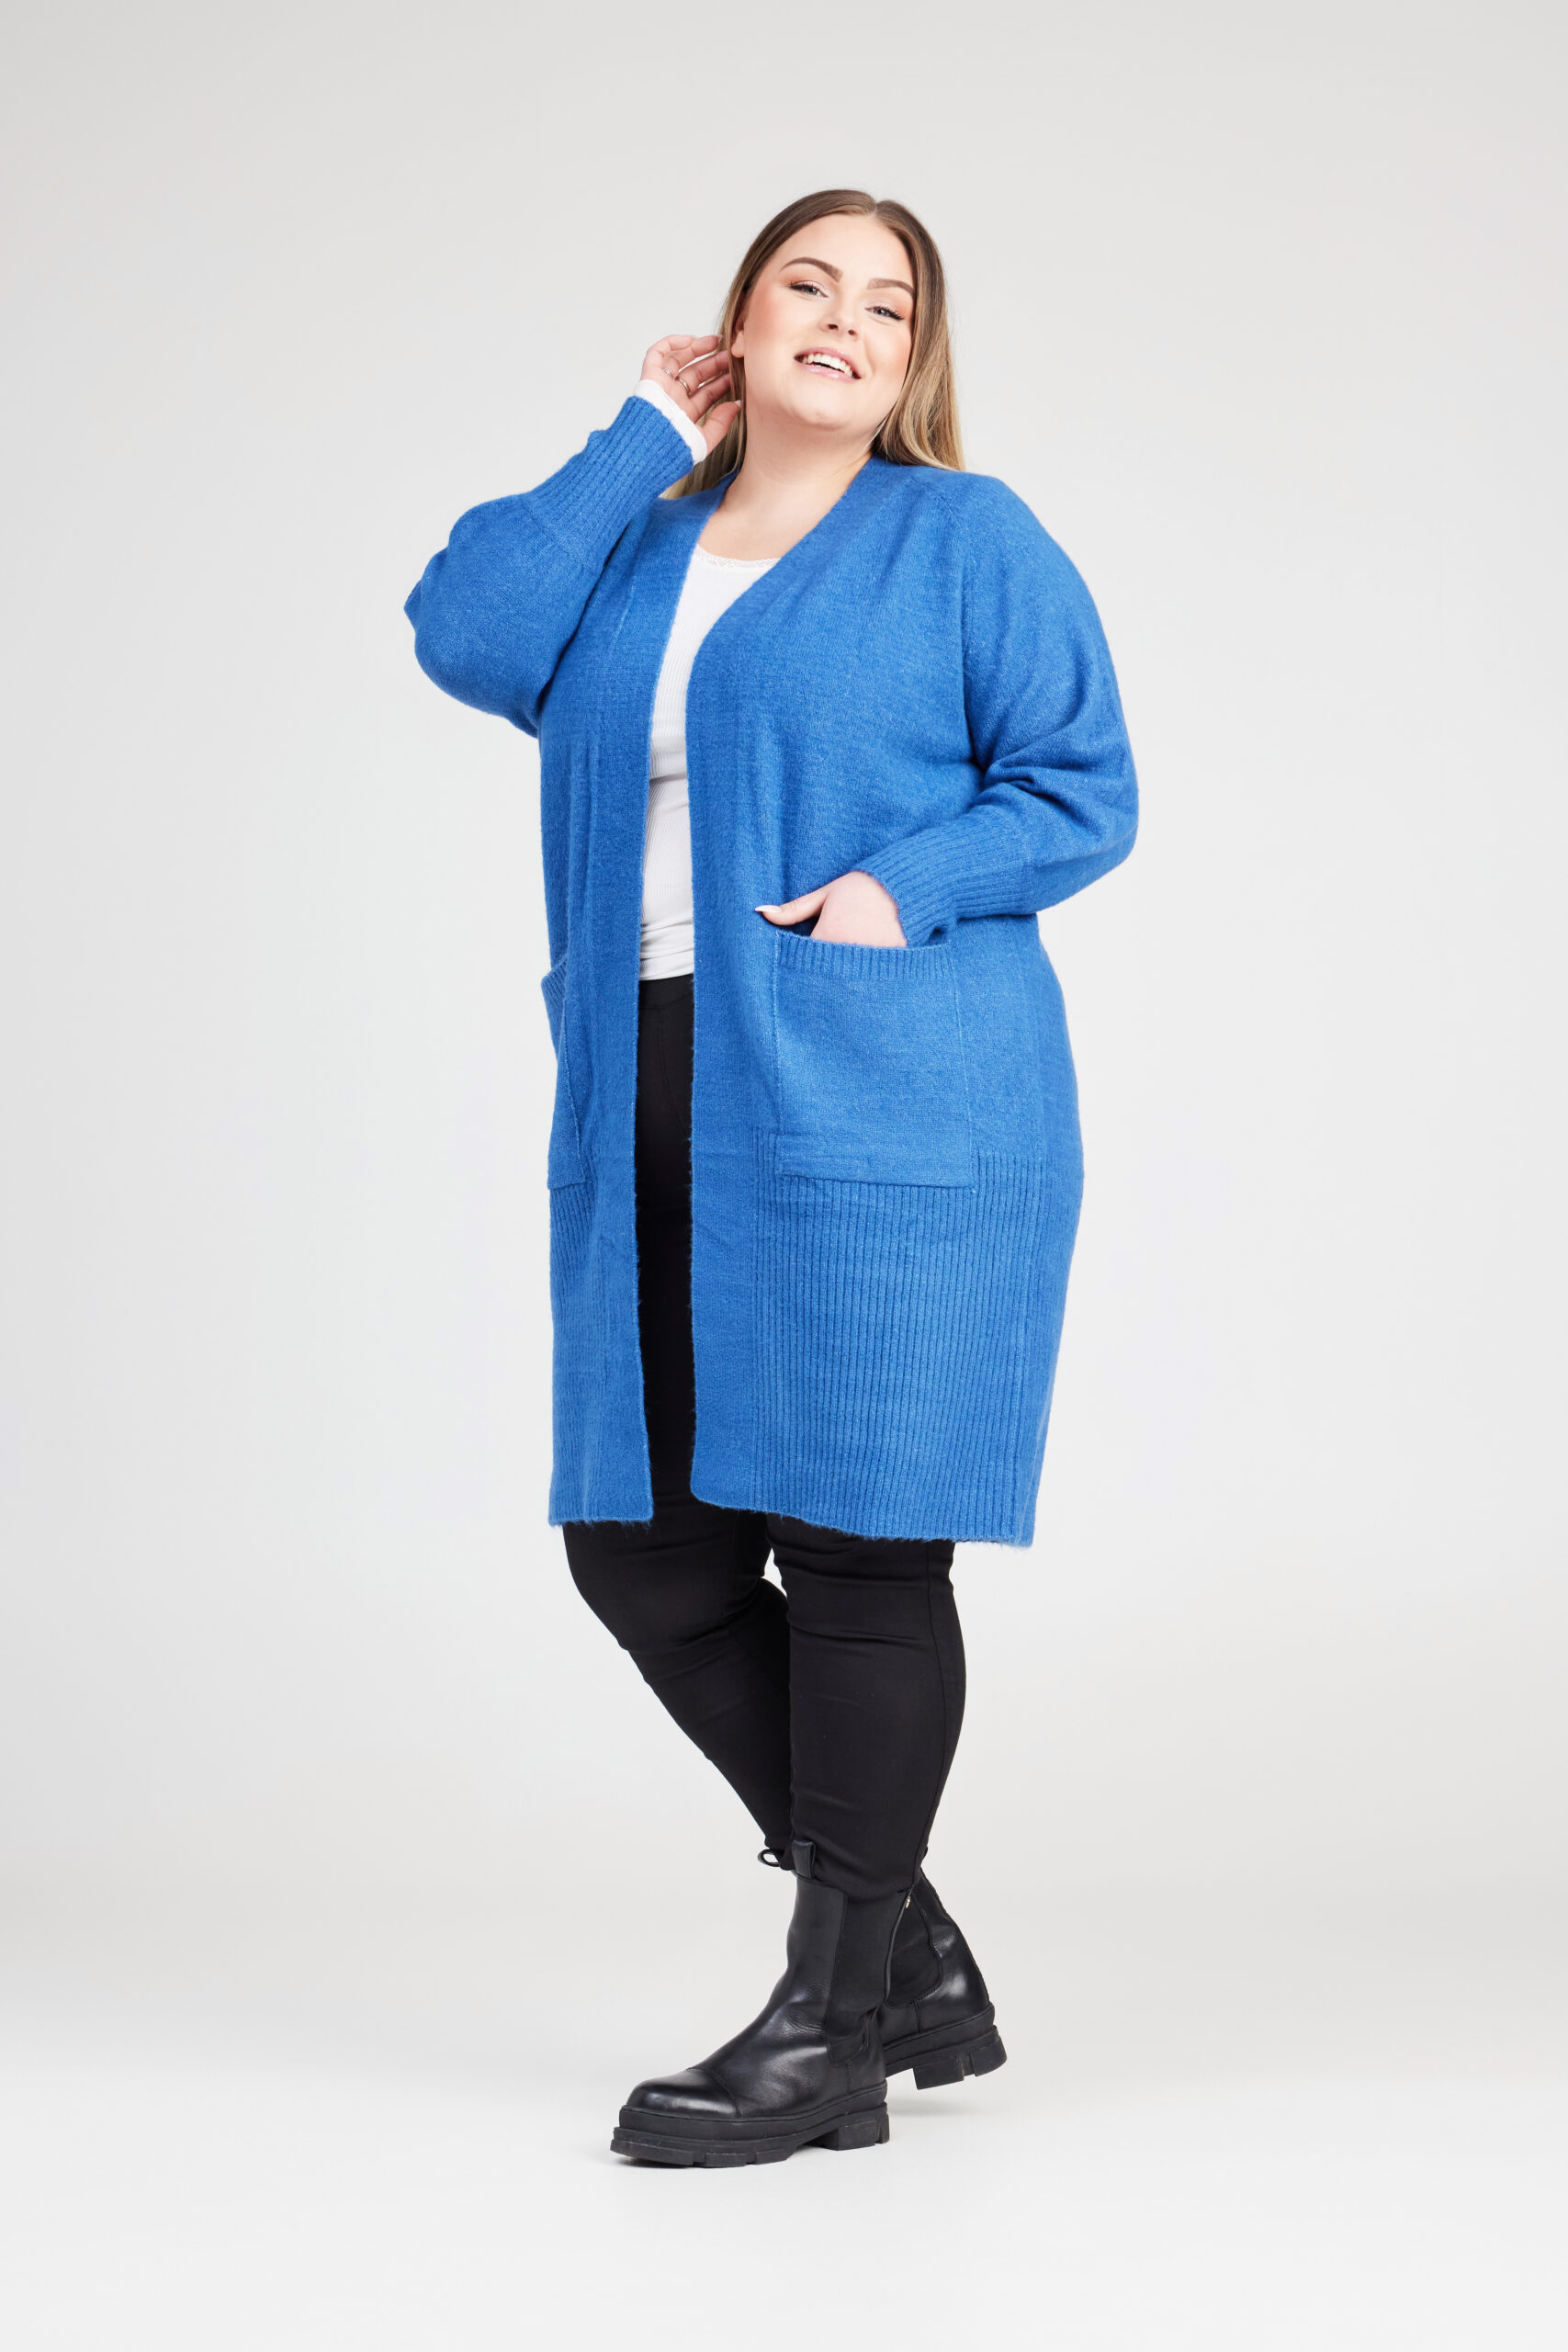 No. 1 By Ox long cardigan with balloon sleeves - delft blue op model side